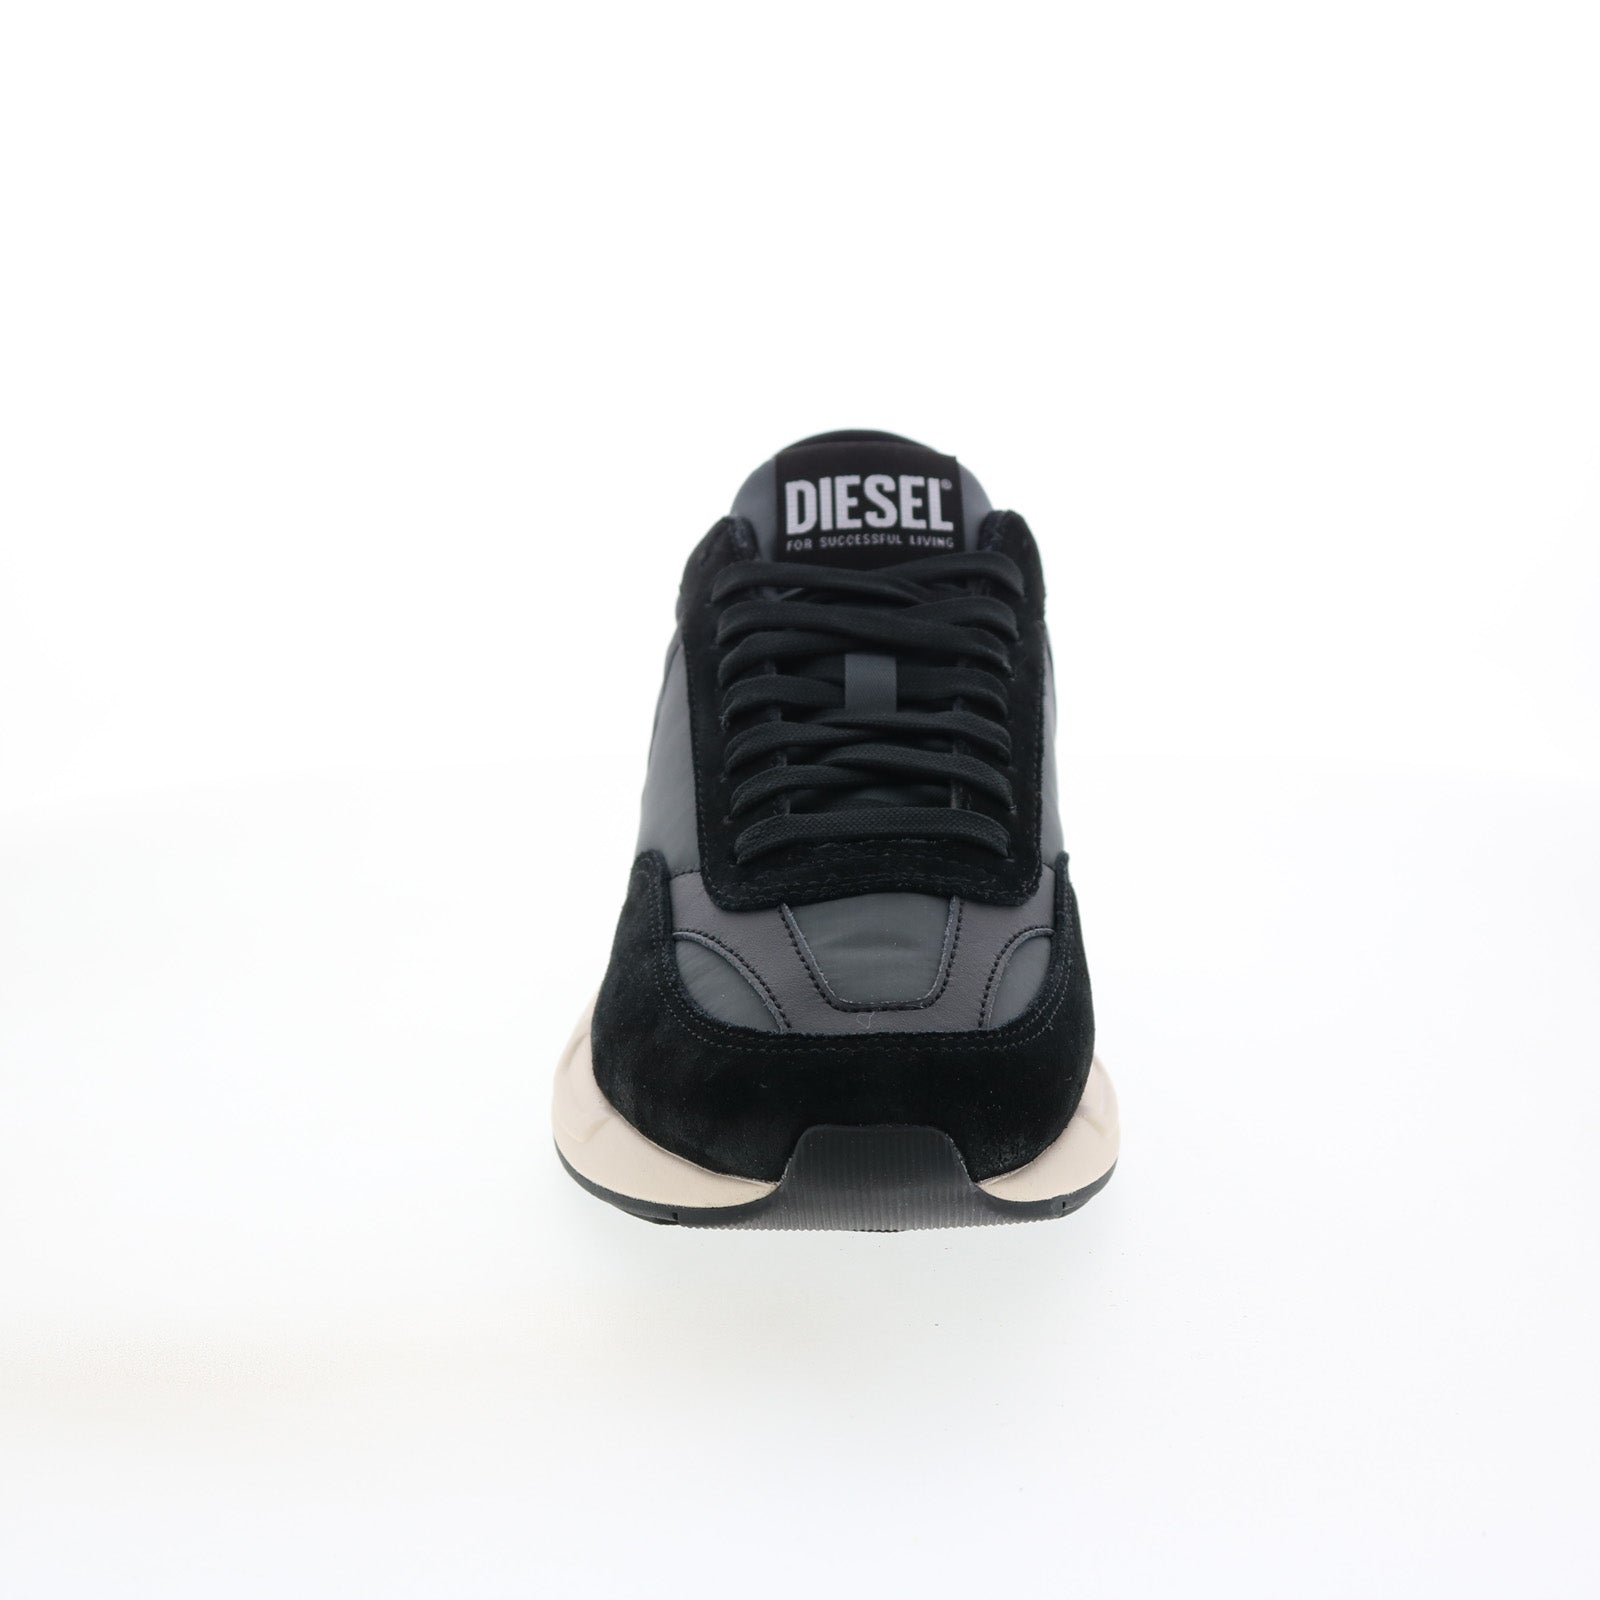 Diesel S-Serendipity F Womens Black Suede Lifestyle Sneakers Shoes